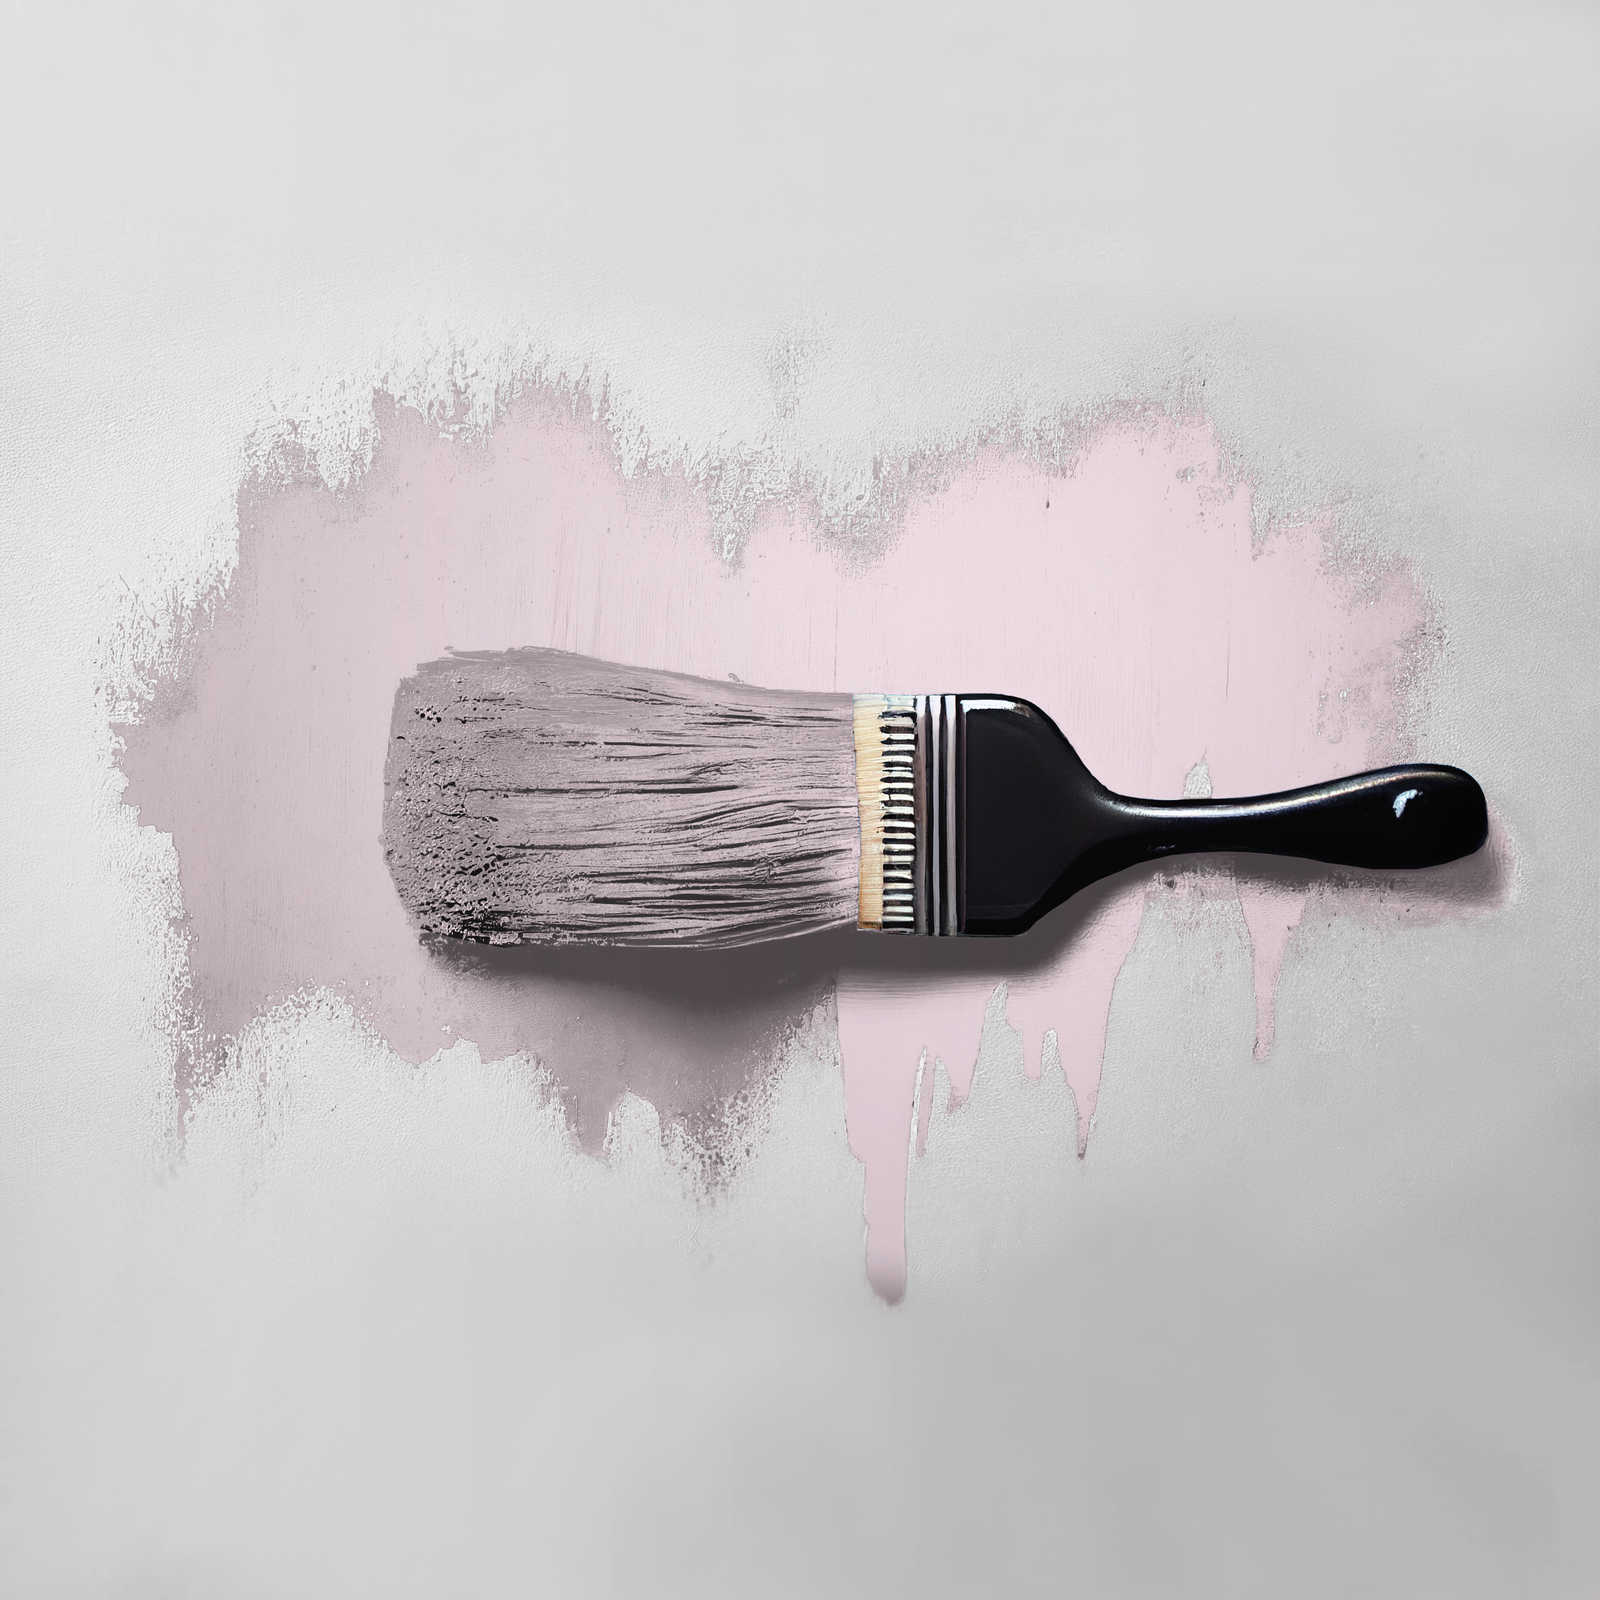             Wall Paint TCK2003 »Milky Strawberry« in lovely pink – 5.0 litre
        